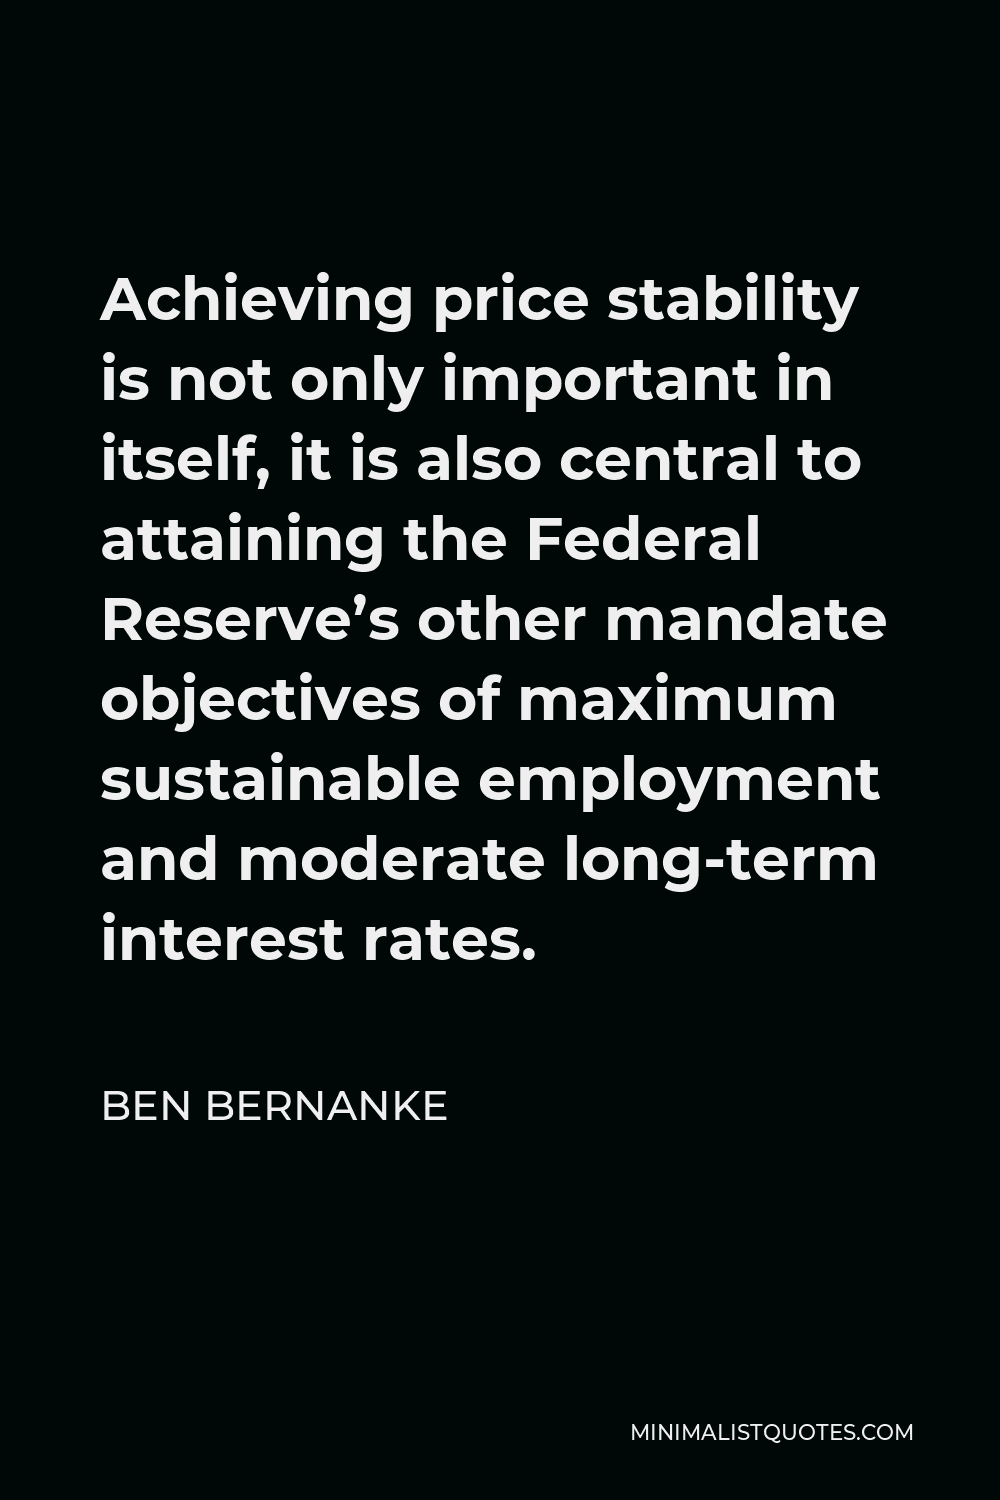 Ben Bernanke Quote - Achieving price stability is not only important in itself, it is also central to attaining the Federal Reserve’s other mandate objectives of maximum sustainable employment and moderate long-term interest rates.